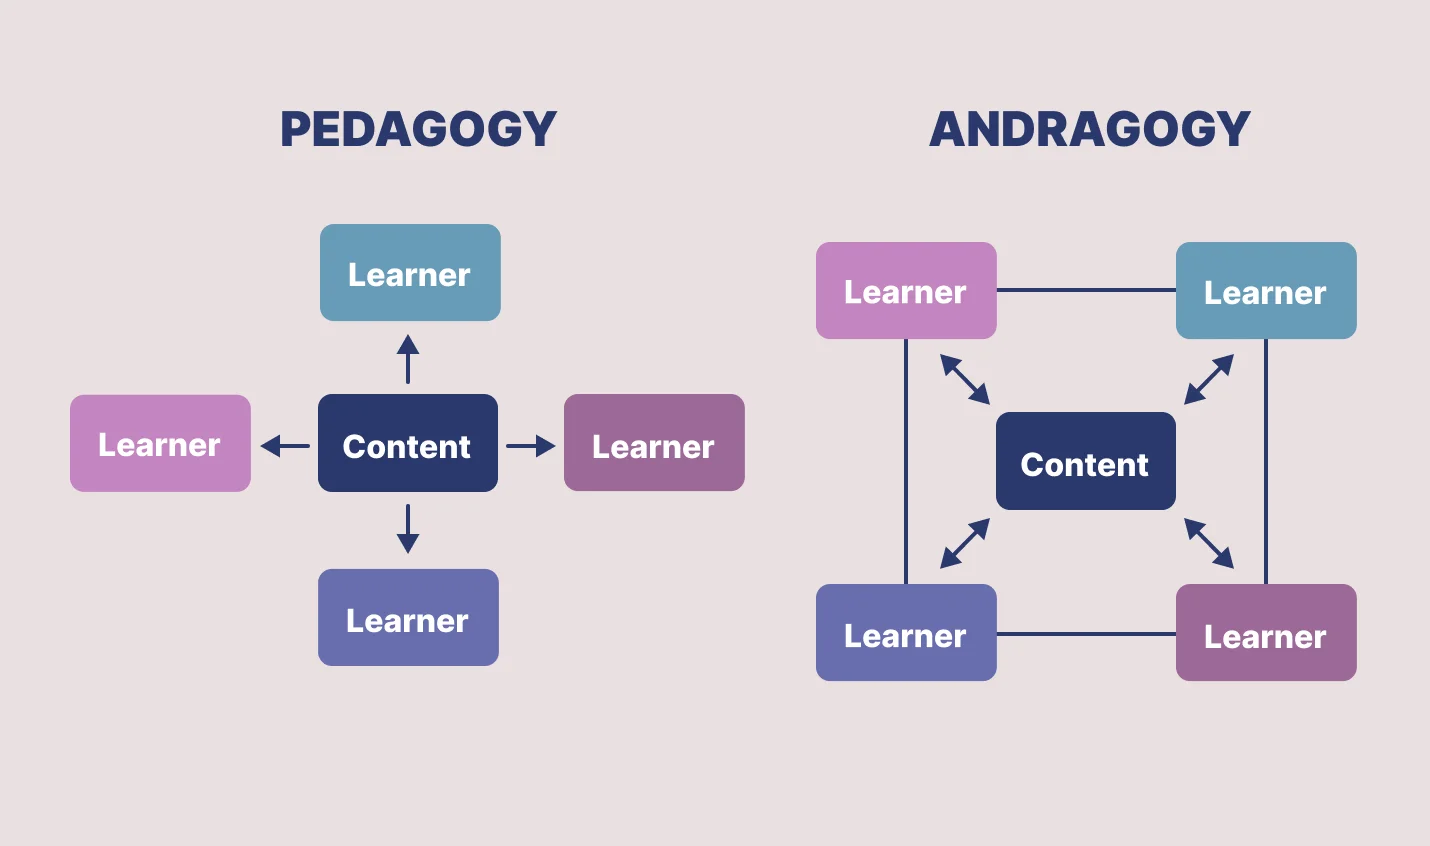 Differences Between ‘Andragogy’ and ‘Pedagogy’ Approach